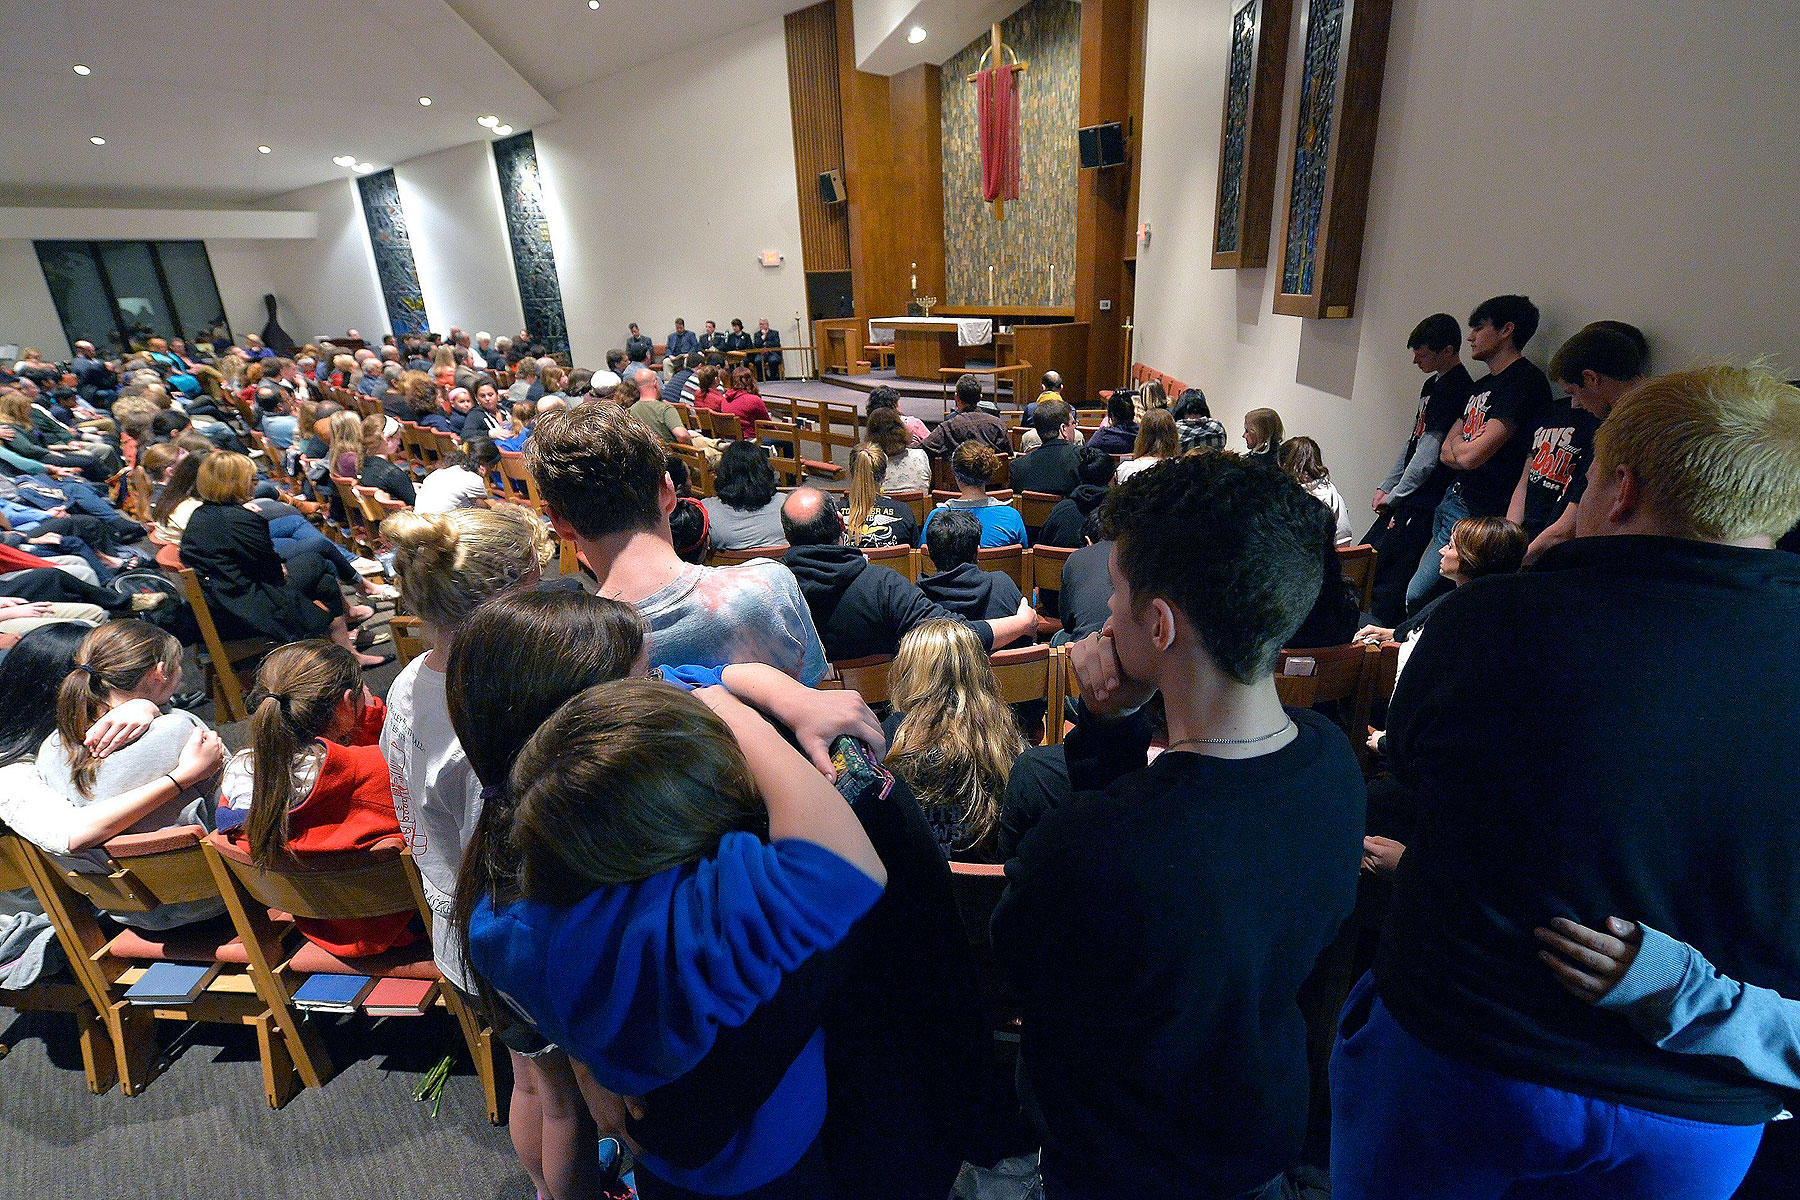 Classmates of one of the victims hug during a prayer service for the victims of the Jewish Community Center shootings in Leawood, Kans., on April 13, 2014 (John Sleezer—Kansas City Star/MCT/Getty Images)